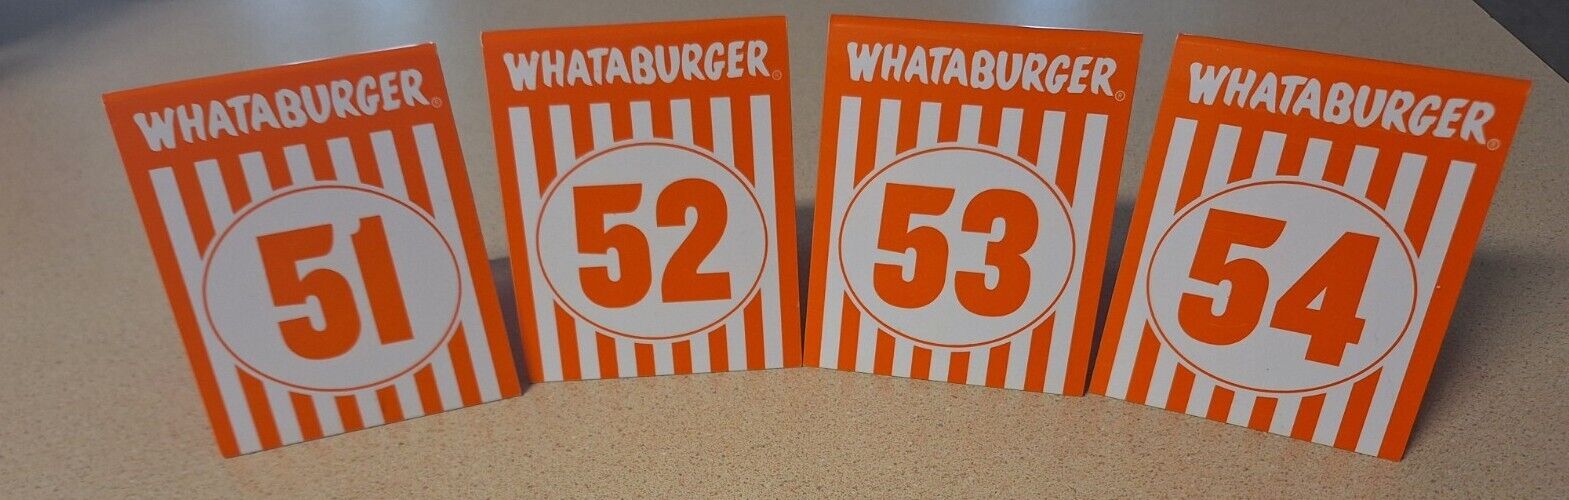 Whataburger Texas Fast Food Restaurant Table Tent Order Numbers 51,52,53,54